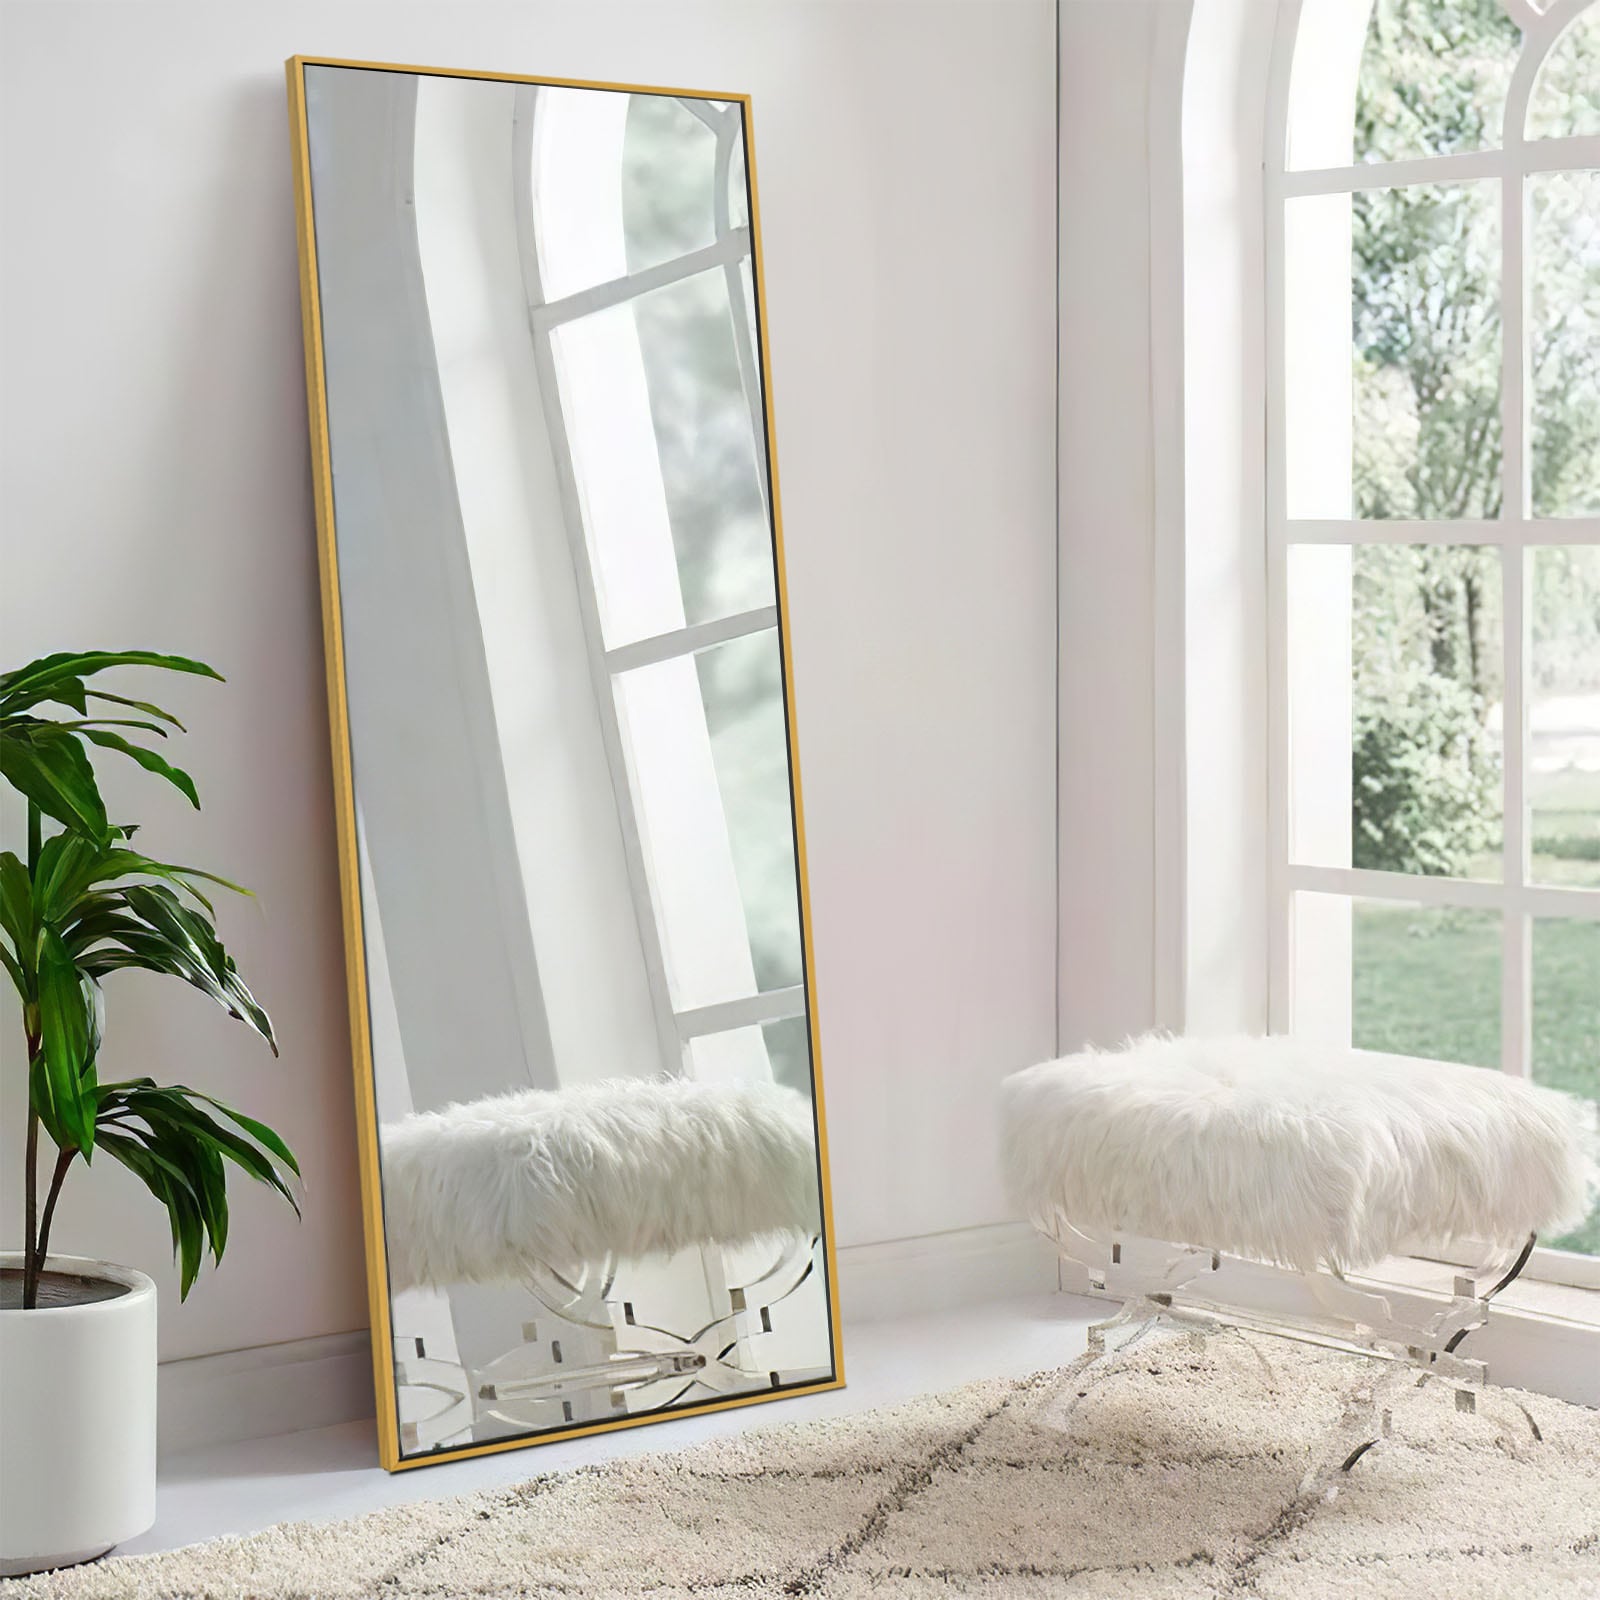 Neutype 65 inch x 22 inch Solid Wood Full Length Mirror with Standing Holder Floor Mirror Rectangular Wall Mounted Mirror Hanging Leaning, White, Size